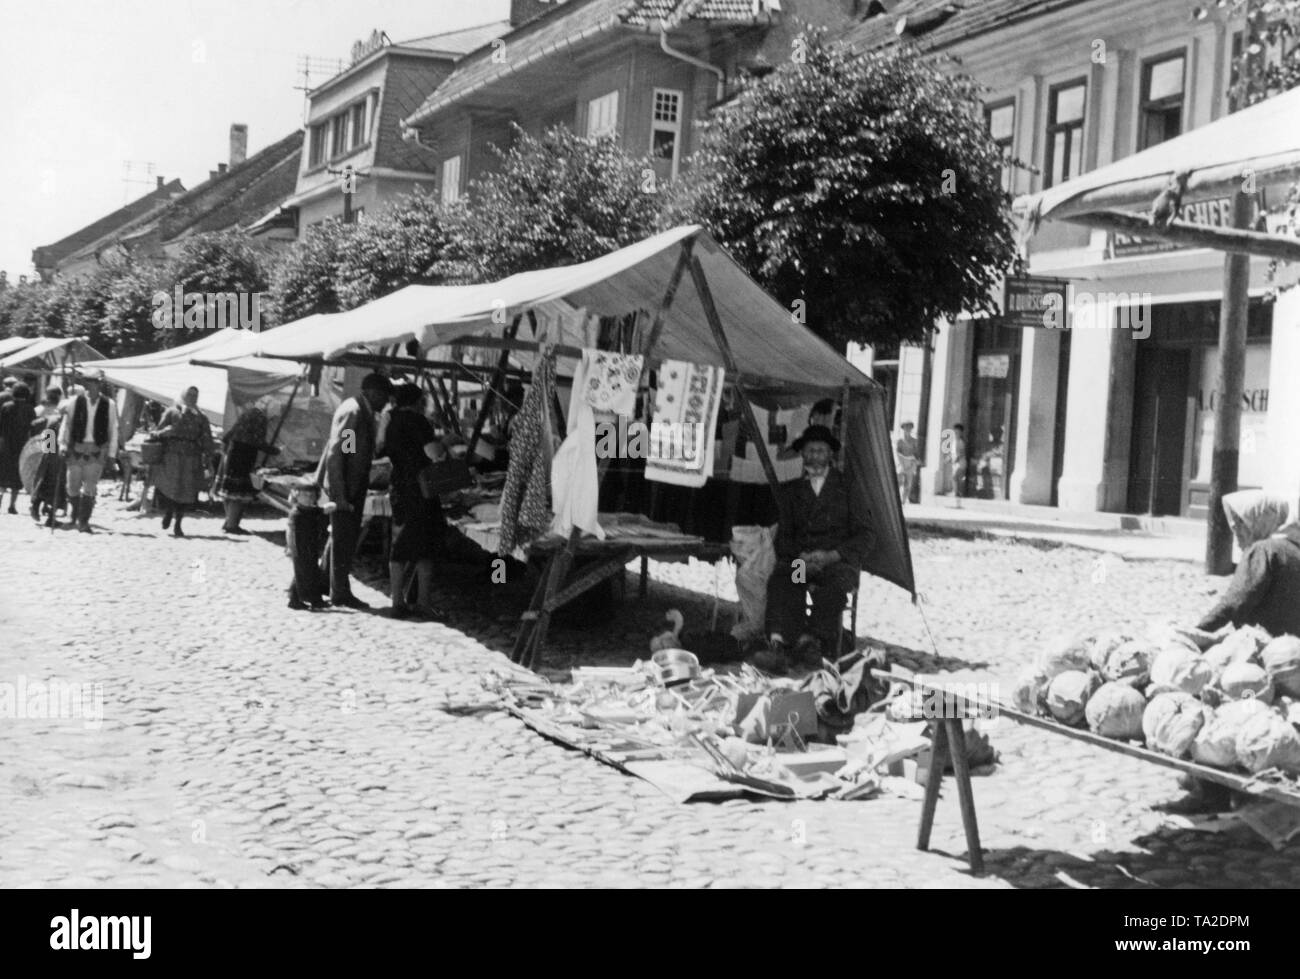 Market in a village in the Slovak region of Spis. The scene is from the Tobis documentary 'Zips'. In March 1939, the Slovak State became independent on the command of Adolf Hitler. Stock Photo